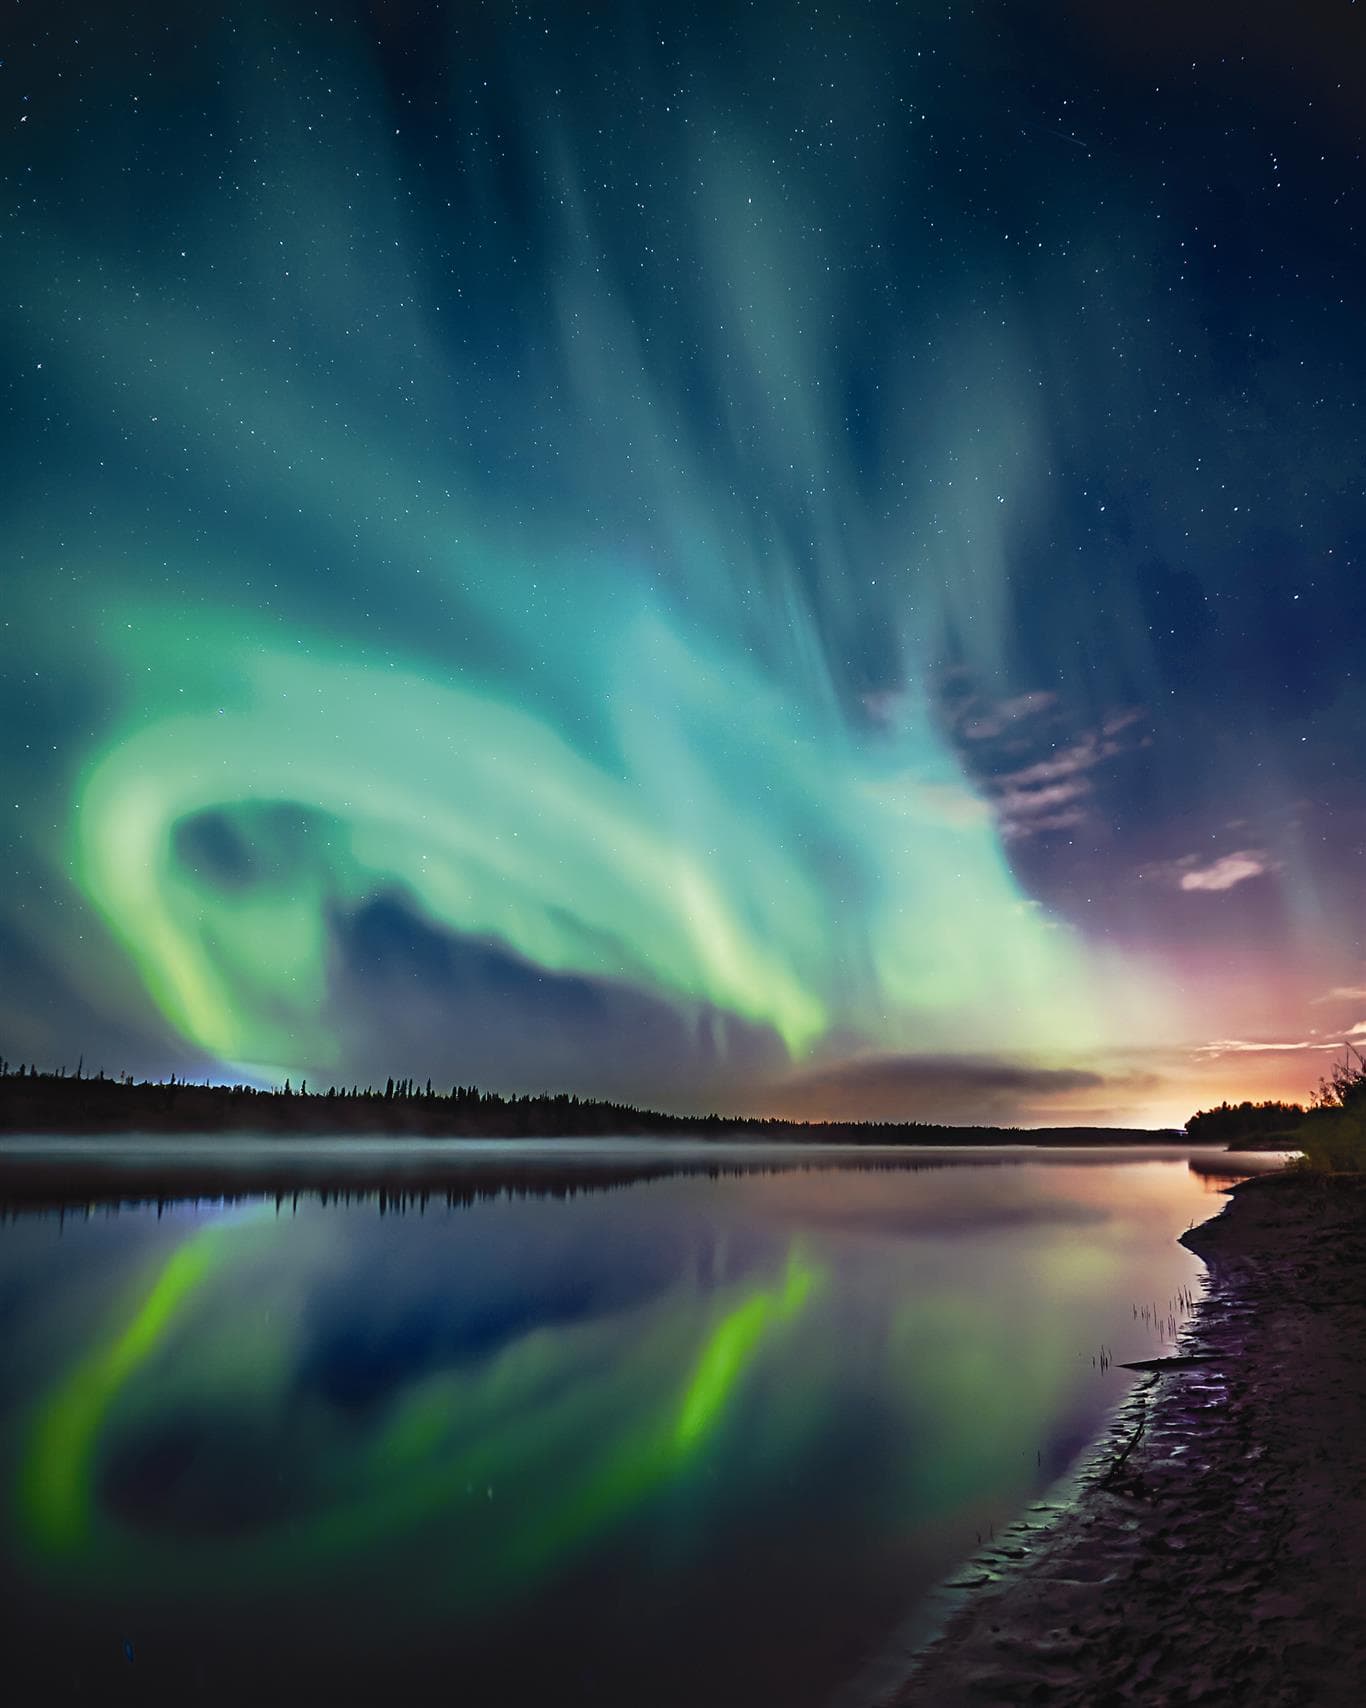 The picture shows the aurora borealis over a river. The sky is dark and clear, and lit with blues and greens.